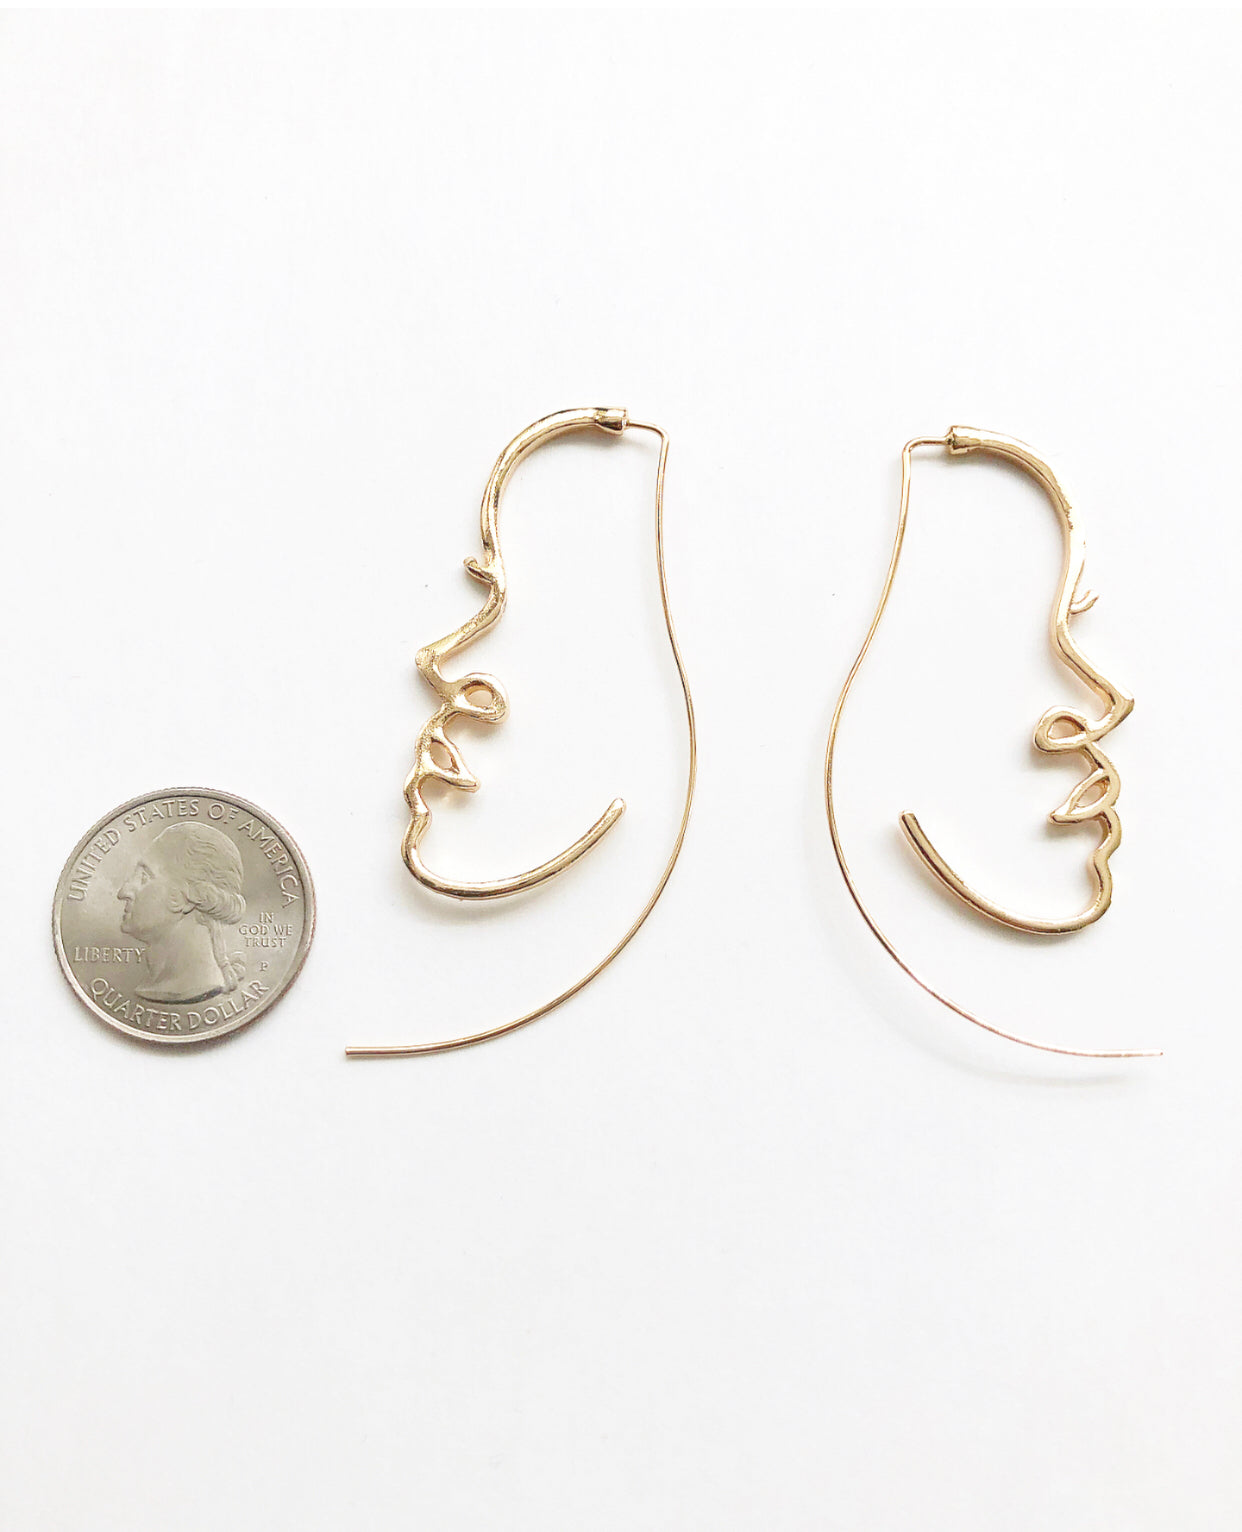 Portrait of a Lady Earrings next to a quarter for size comparison.